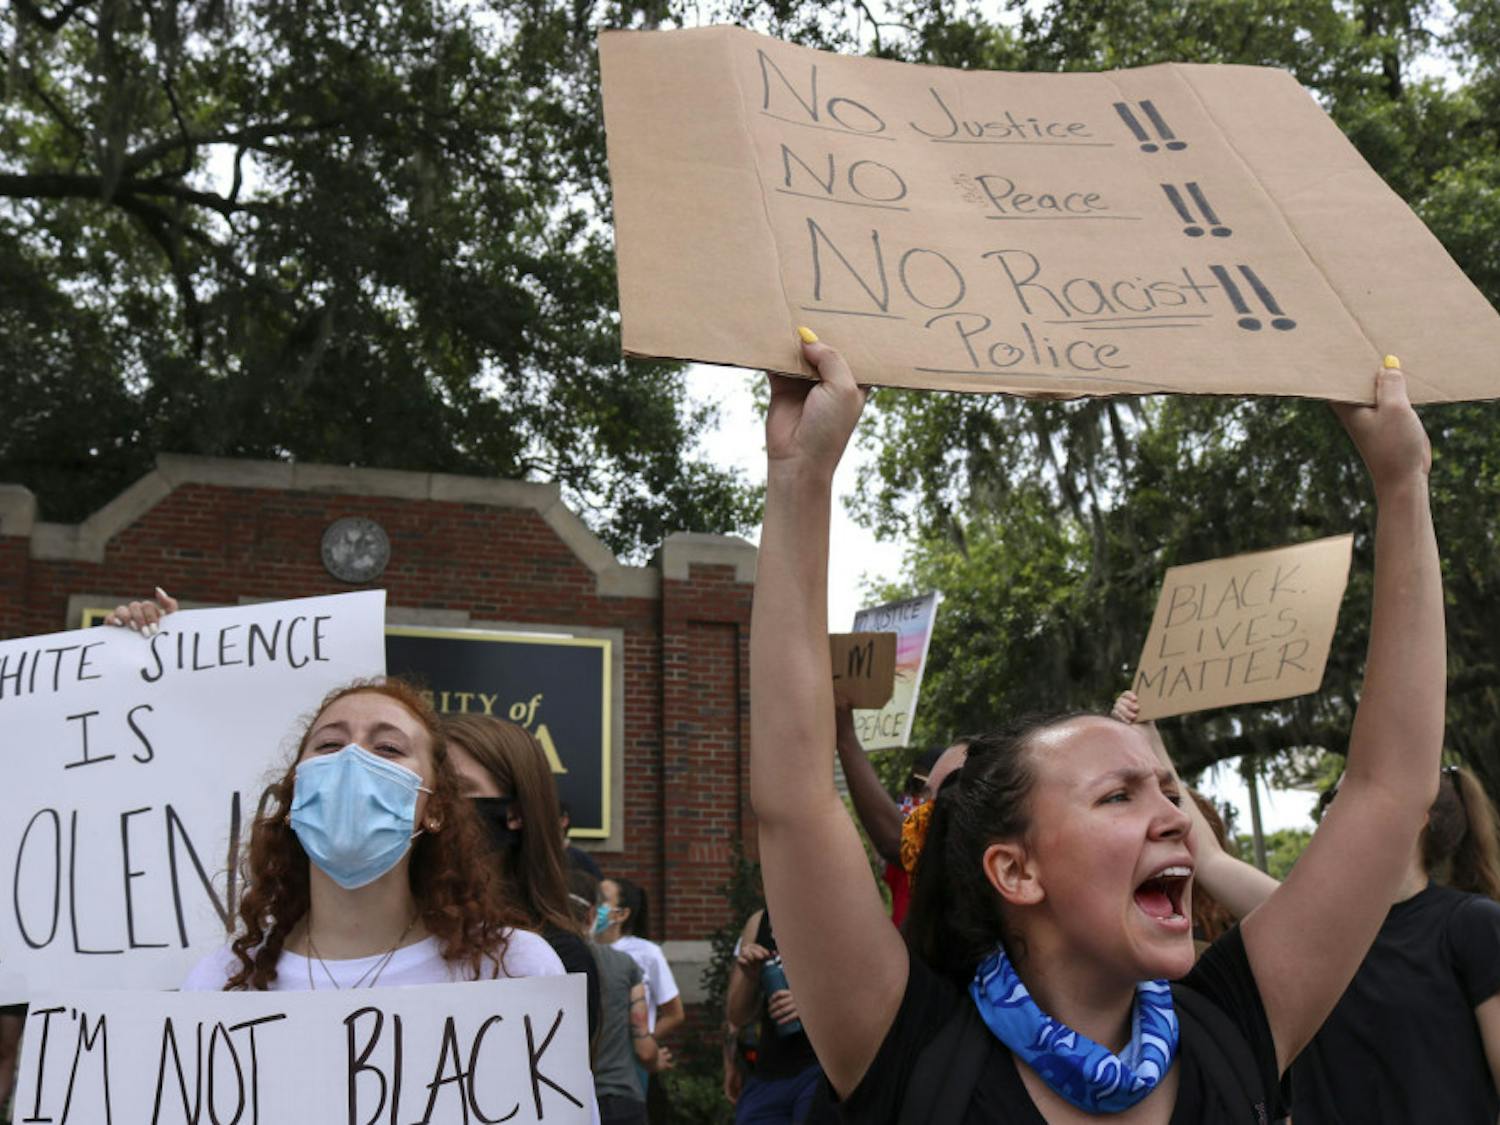 Alexzandria Rogers, a 22-year-old UCF political science major and Gainesville resident, shouts as protestors demand justice for George Floyd, an unarmed black man who was killed in Minneapolis police custody on May 25, 2020.
&nbsp;